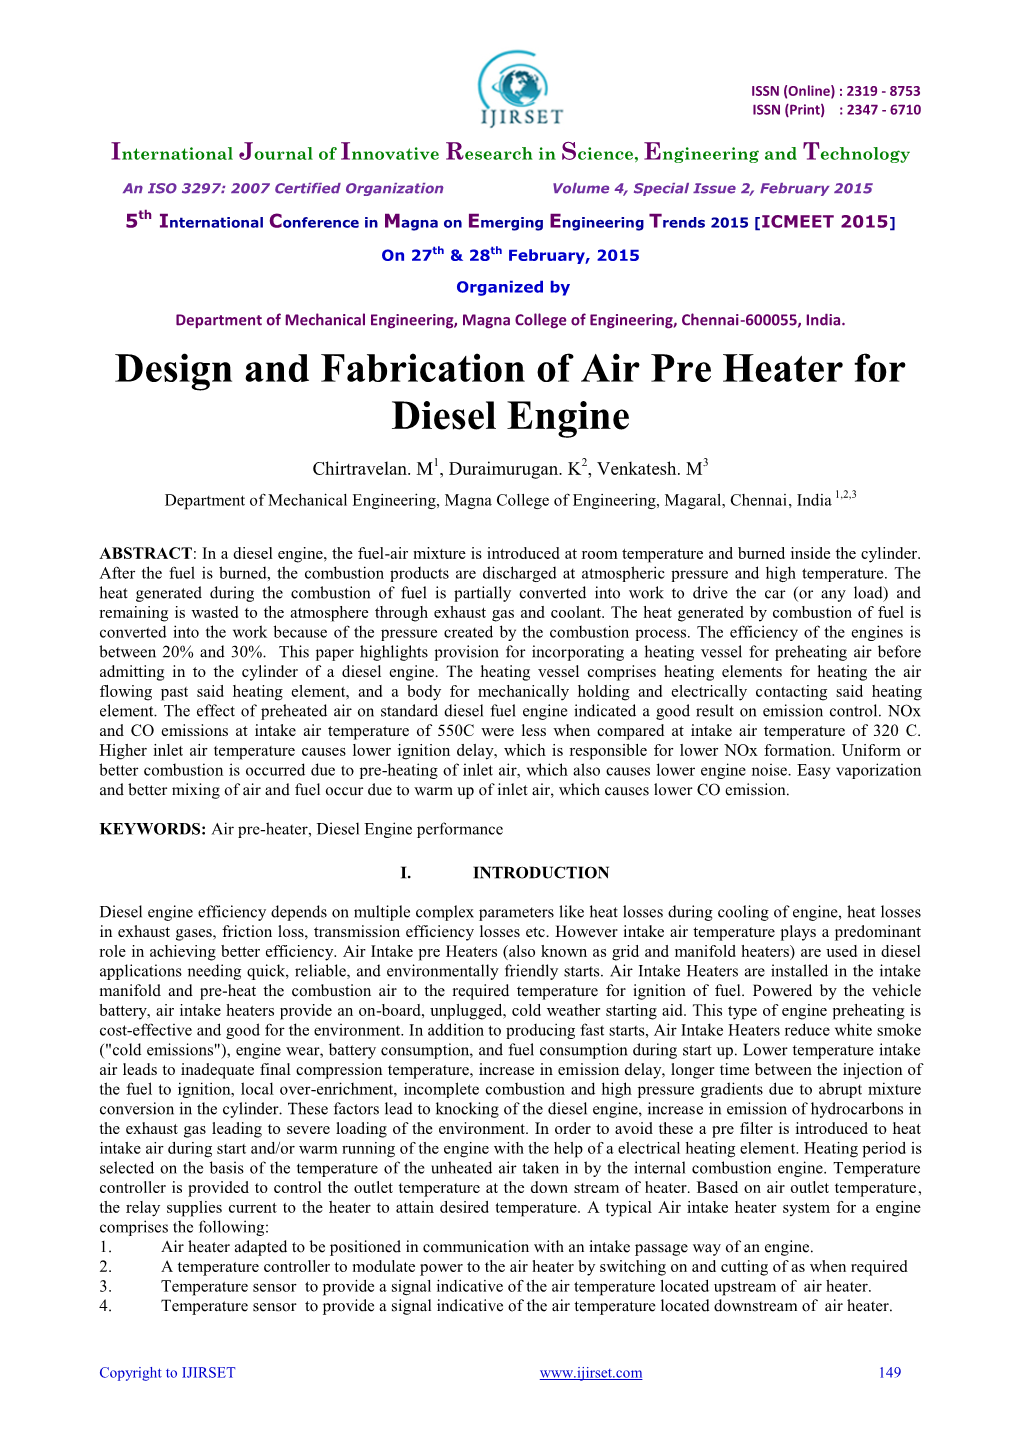 Design and Fabrication of Air Pre Heater for Diesel Engine